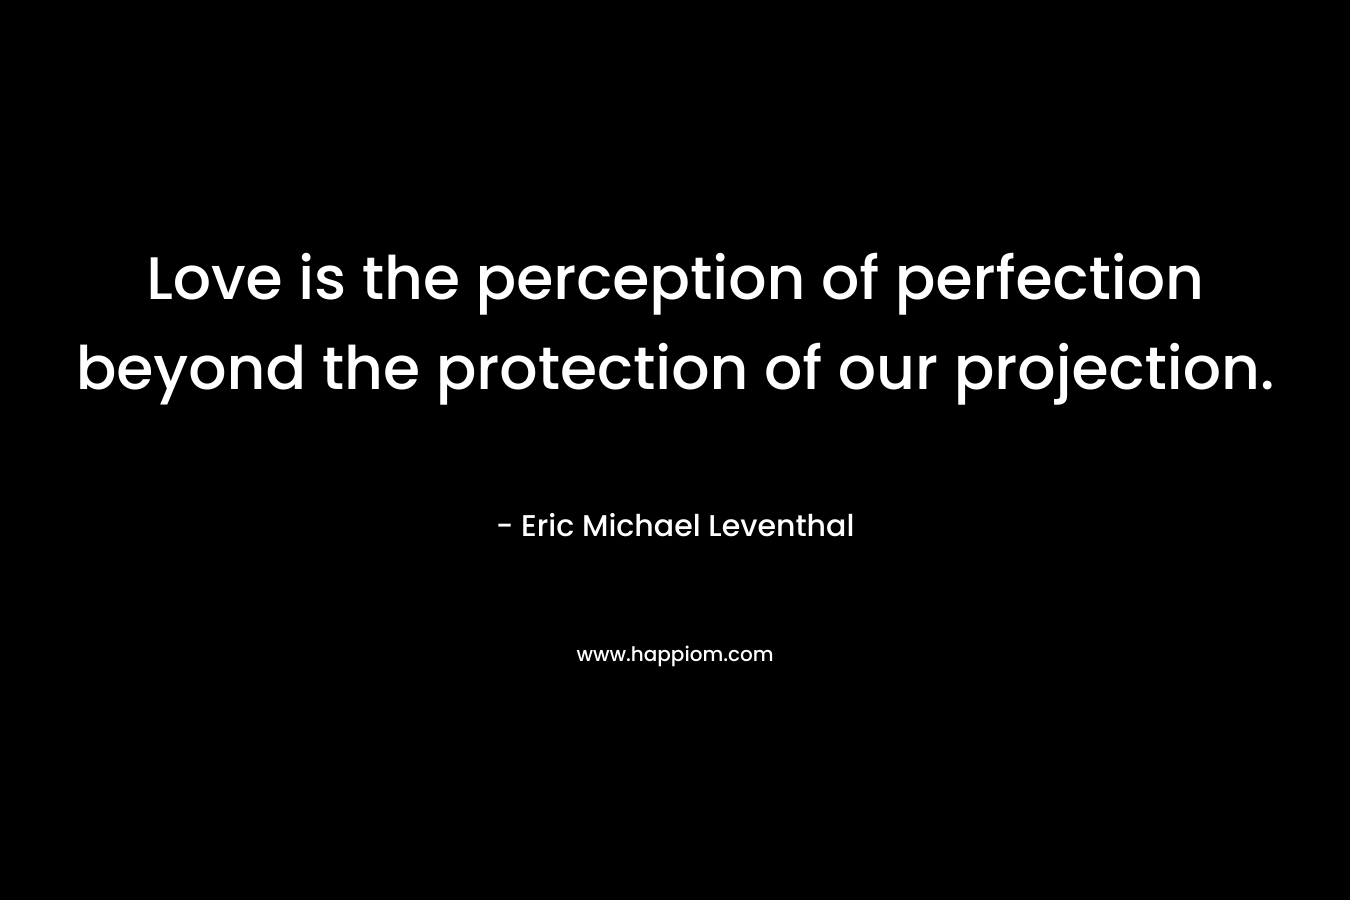 Love is the perception of perfection beyond the protection of our projection.